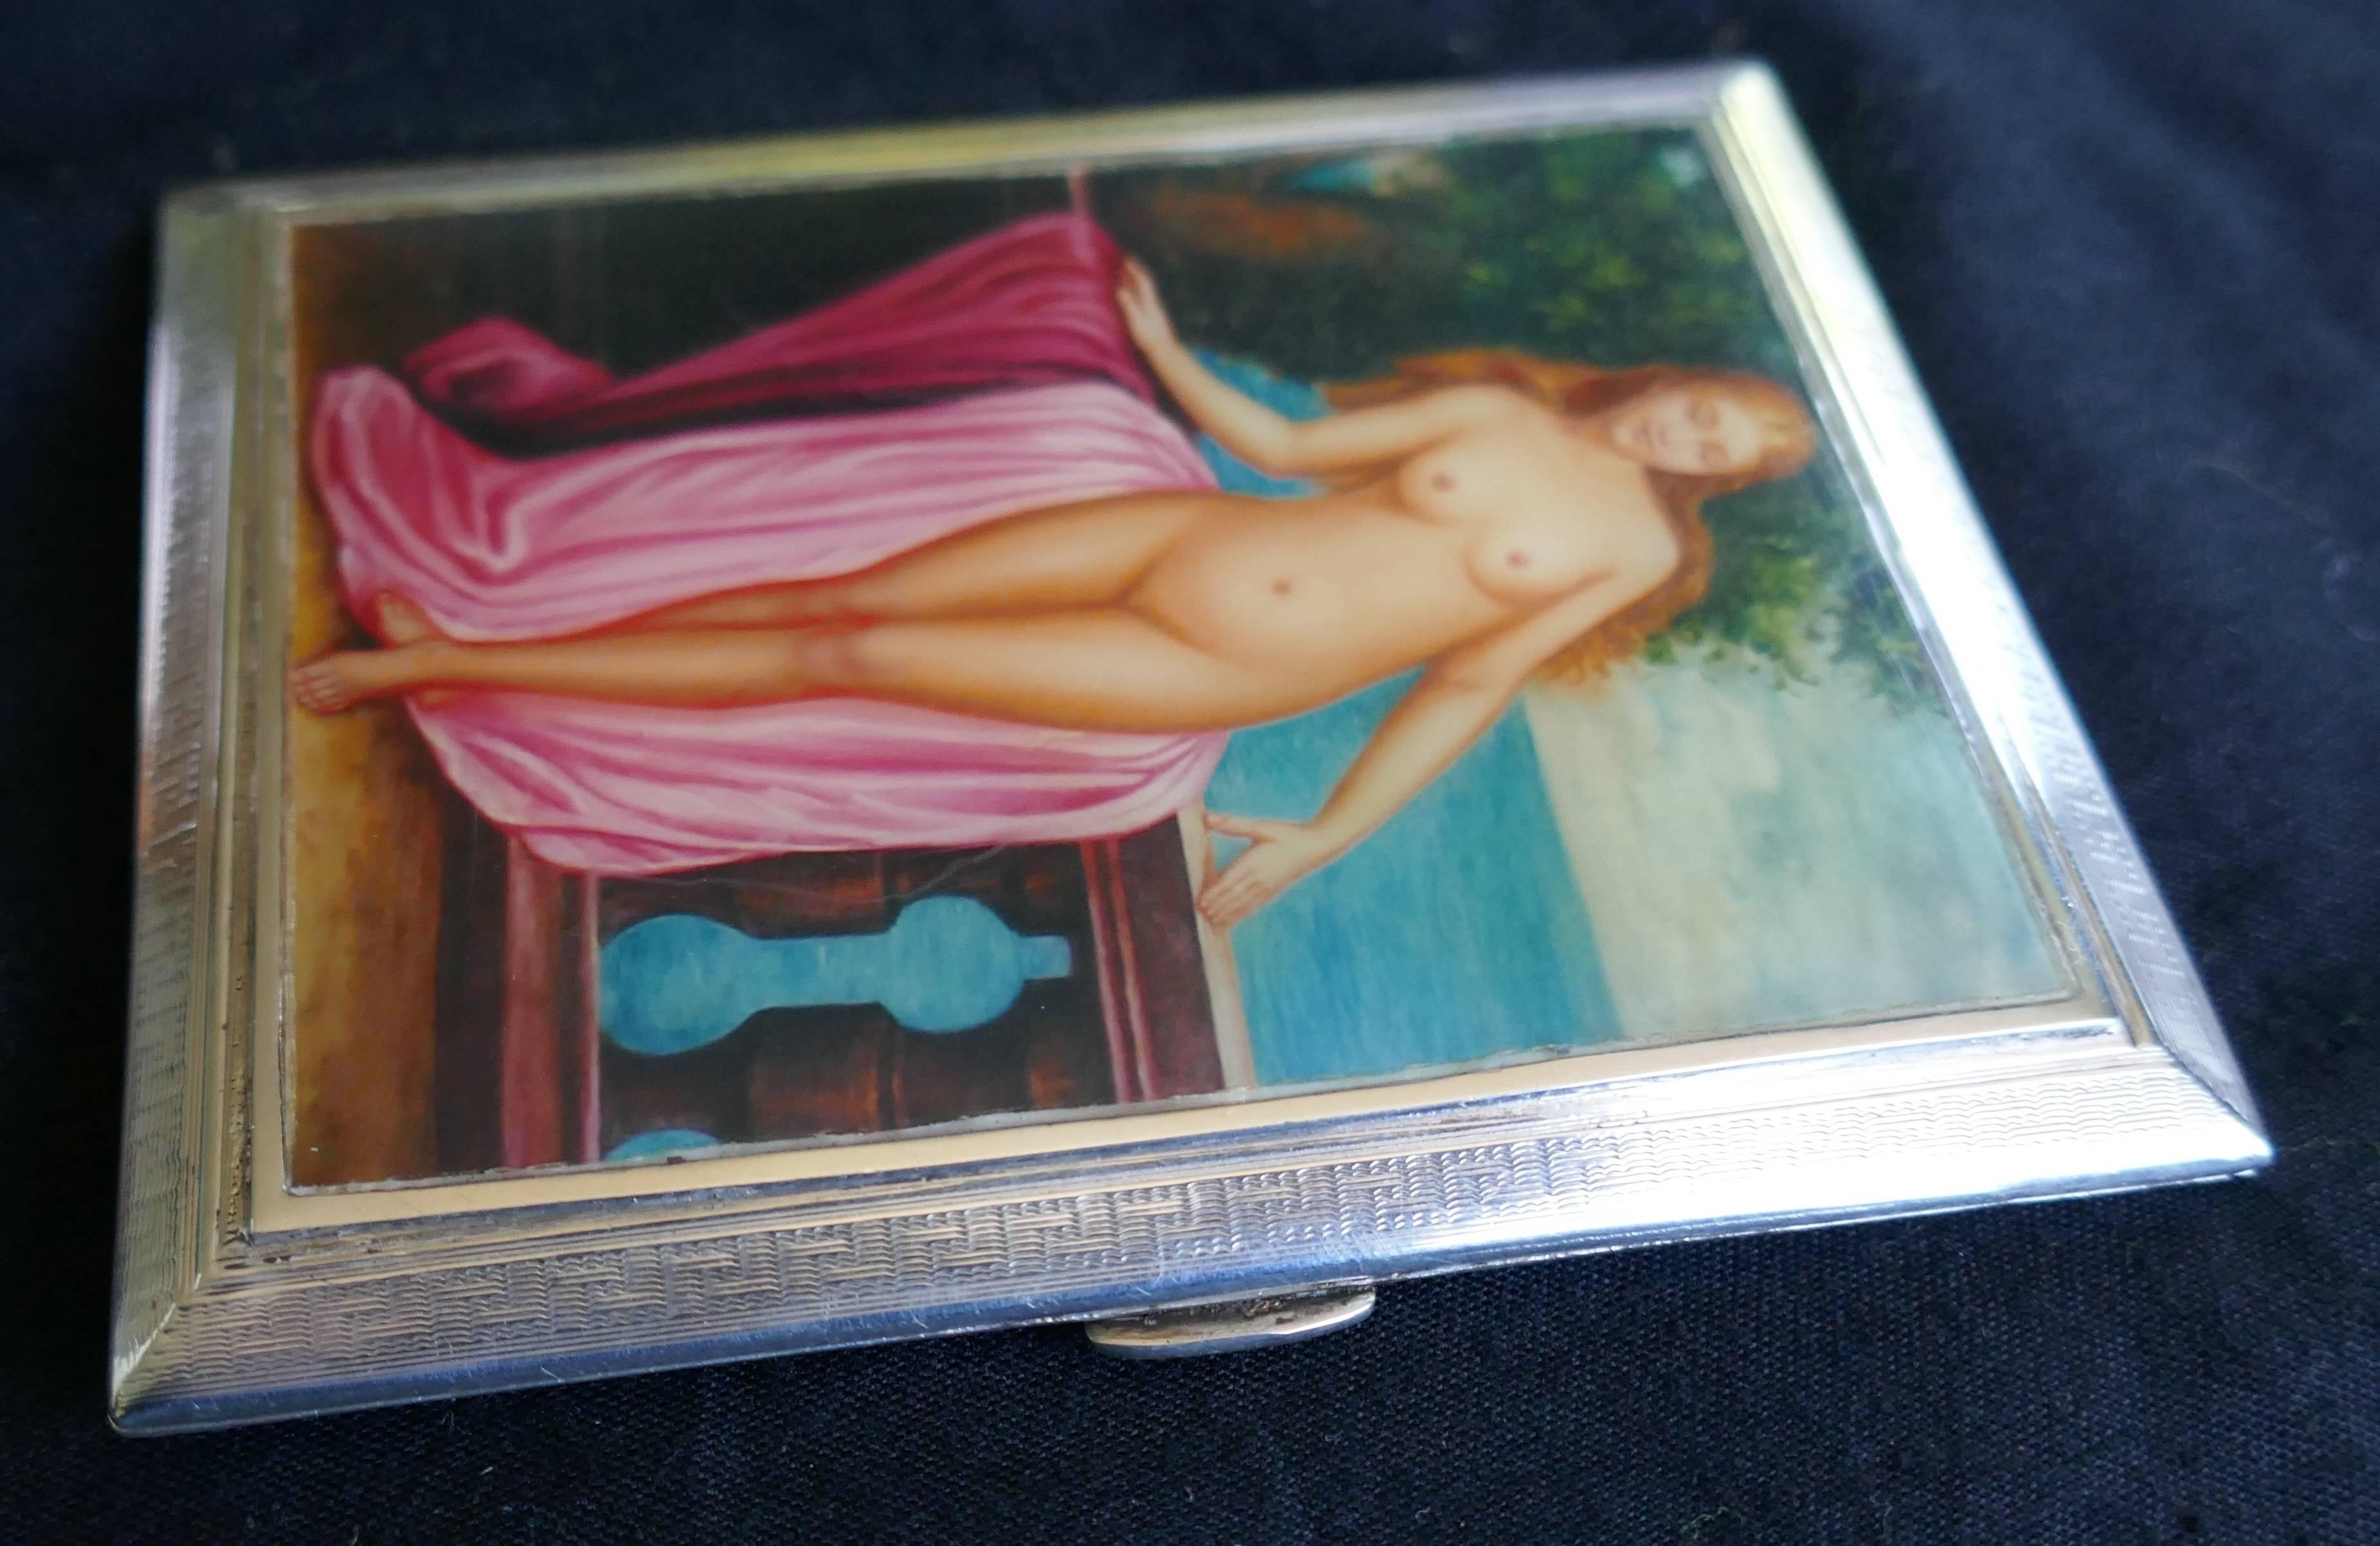 Magnificent Art Nouveau silver and risqué nude enamel cigarette or card case by Padgett & Braham Ltd

This is an exceptional Art Nouveau sterling silver cigarette, it has a rectangular shape with crisp corners, decorated with a key pattern etched